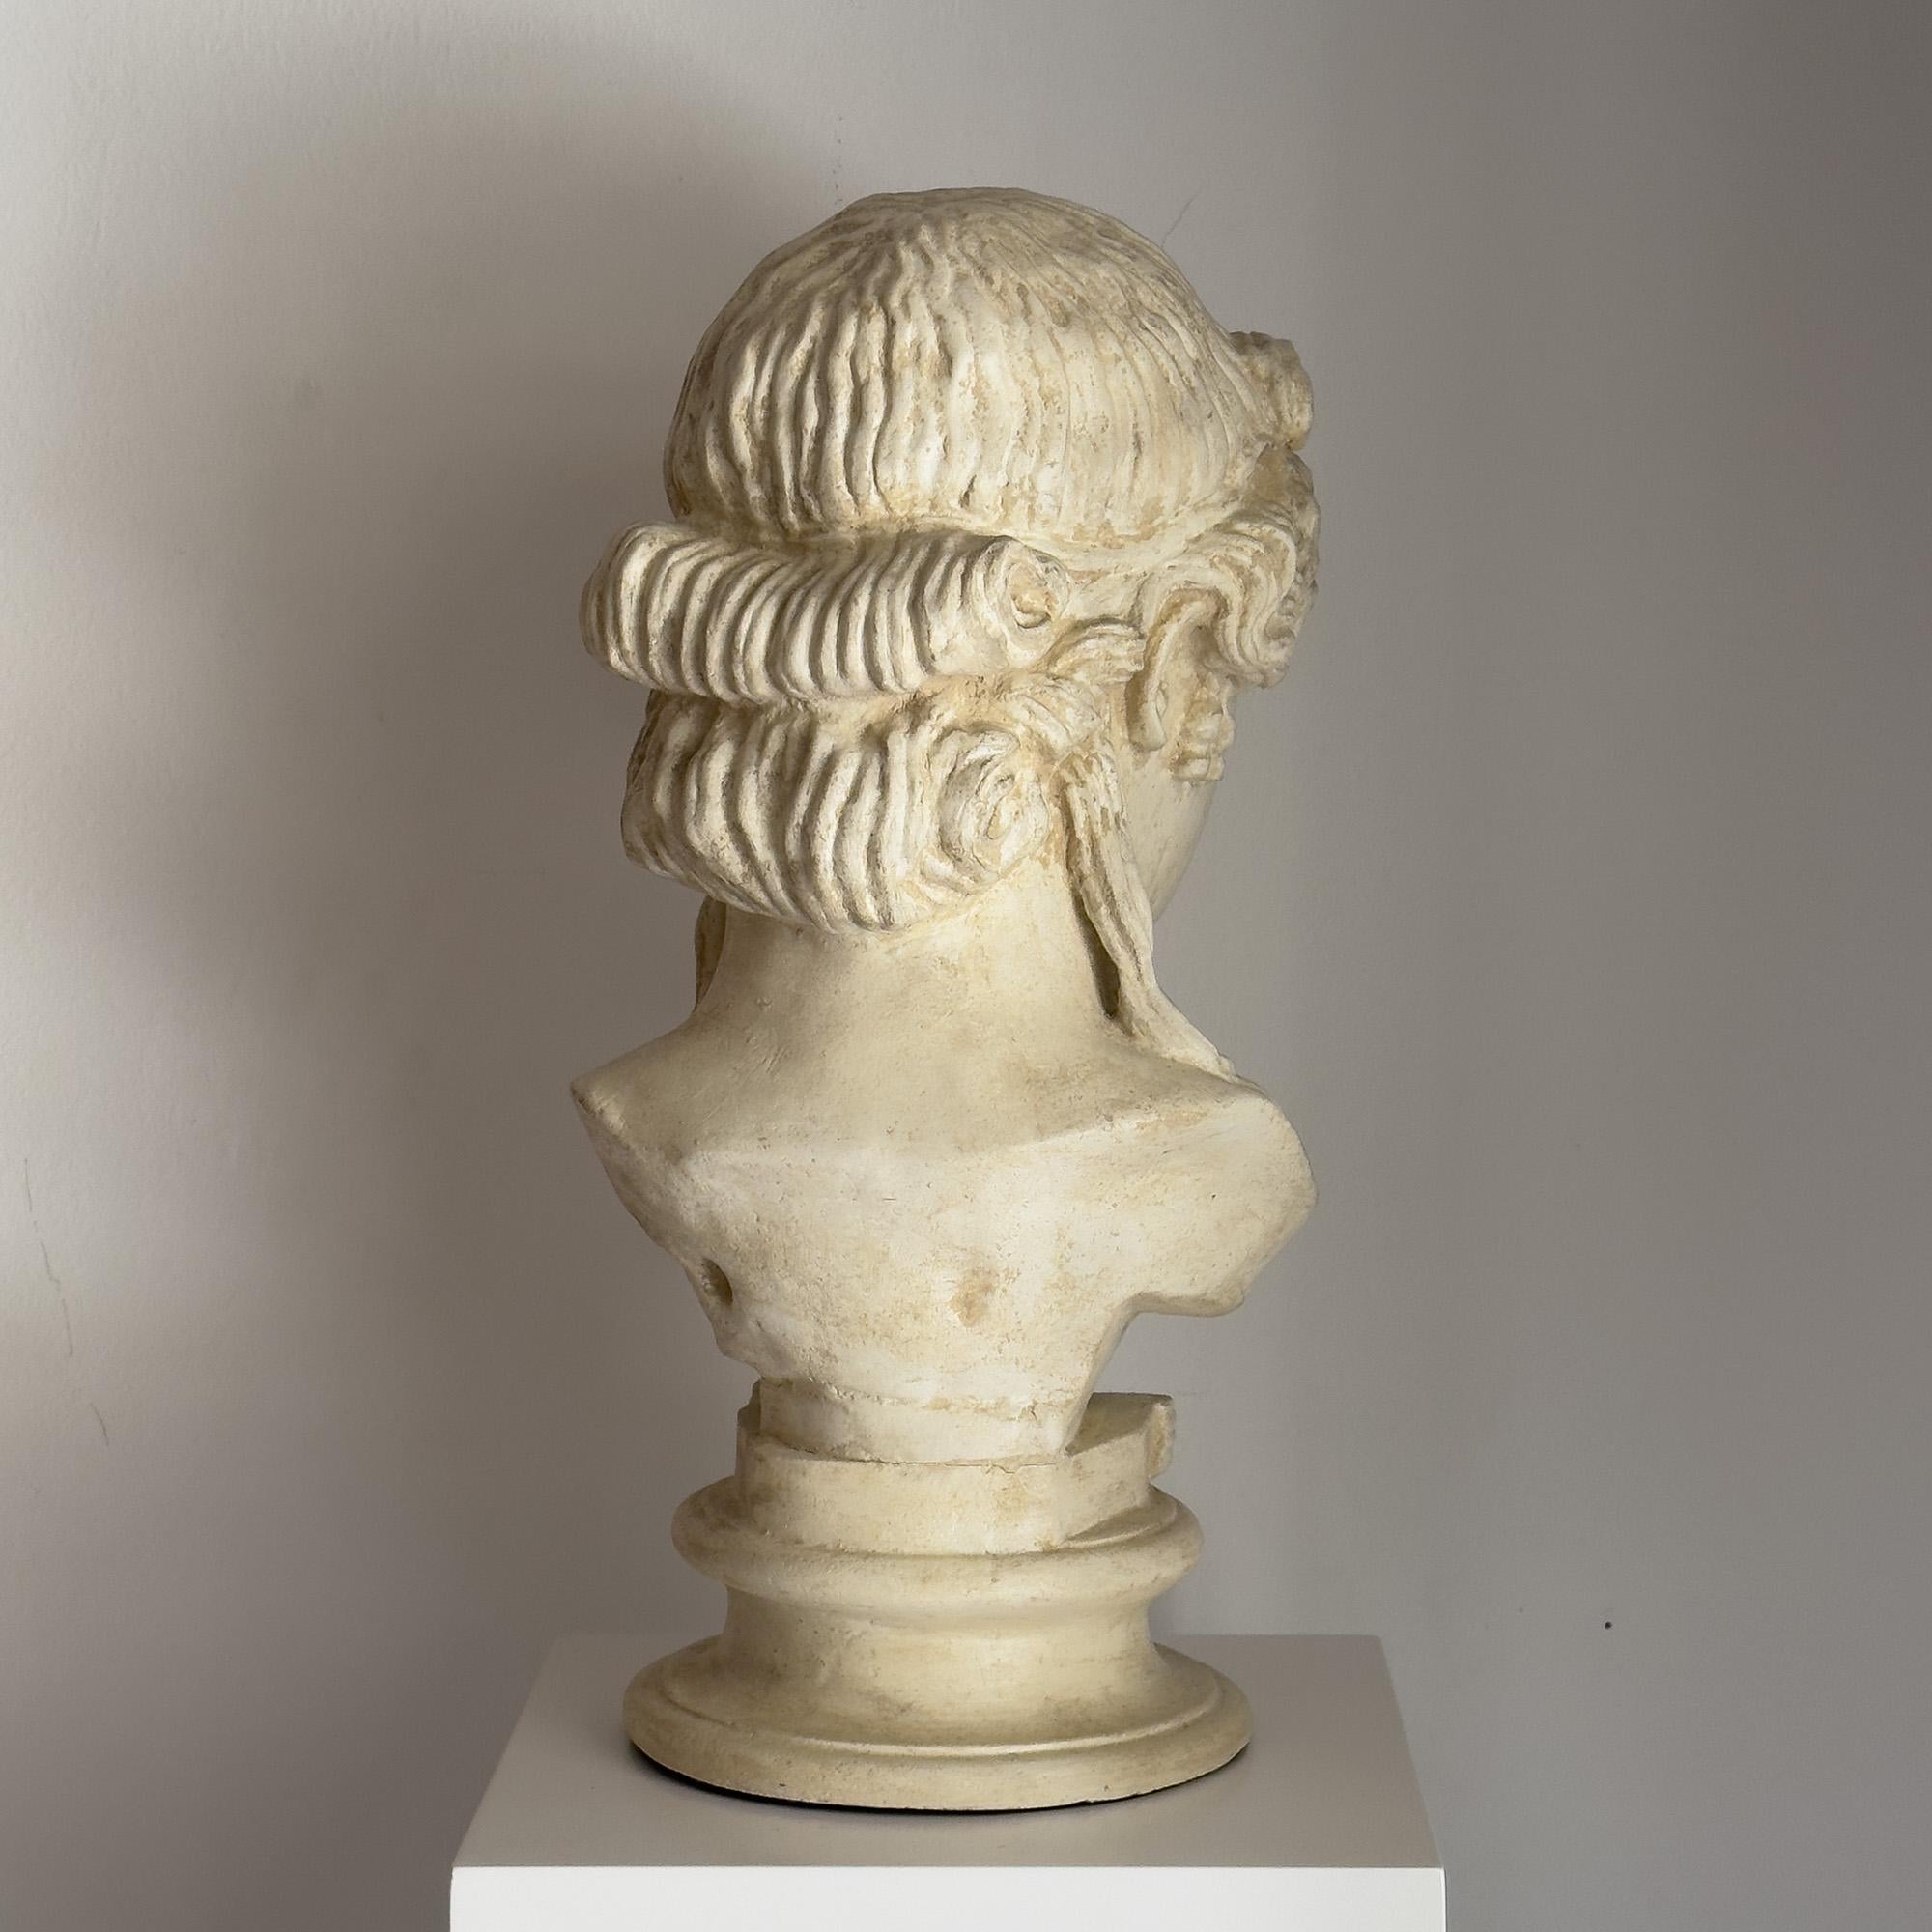 Spanish Bust of Antinoos in the style of classical Rome For Sale